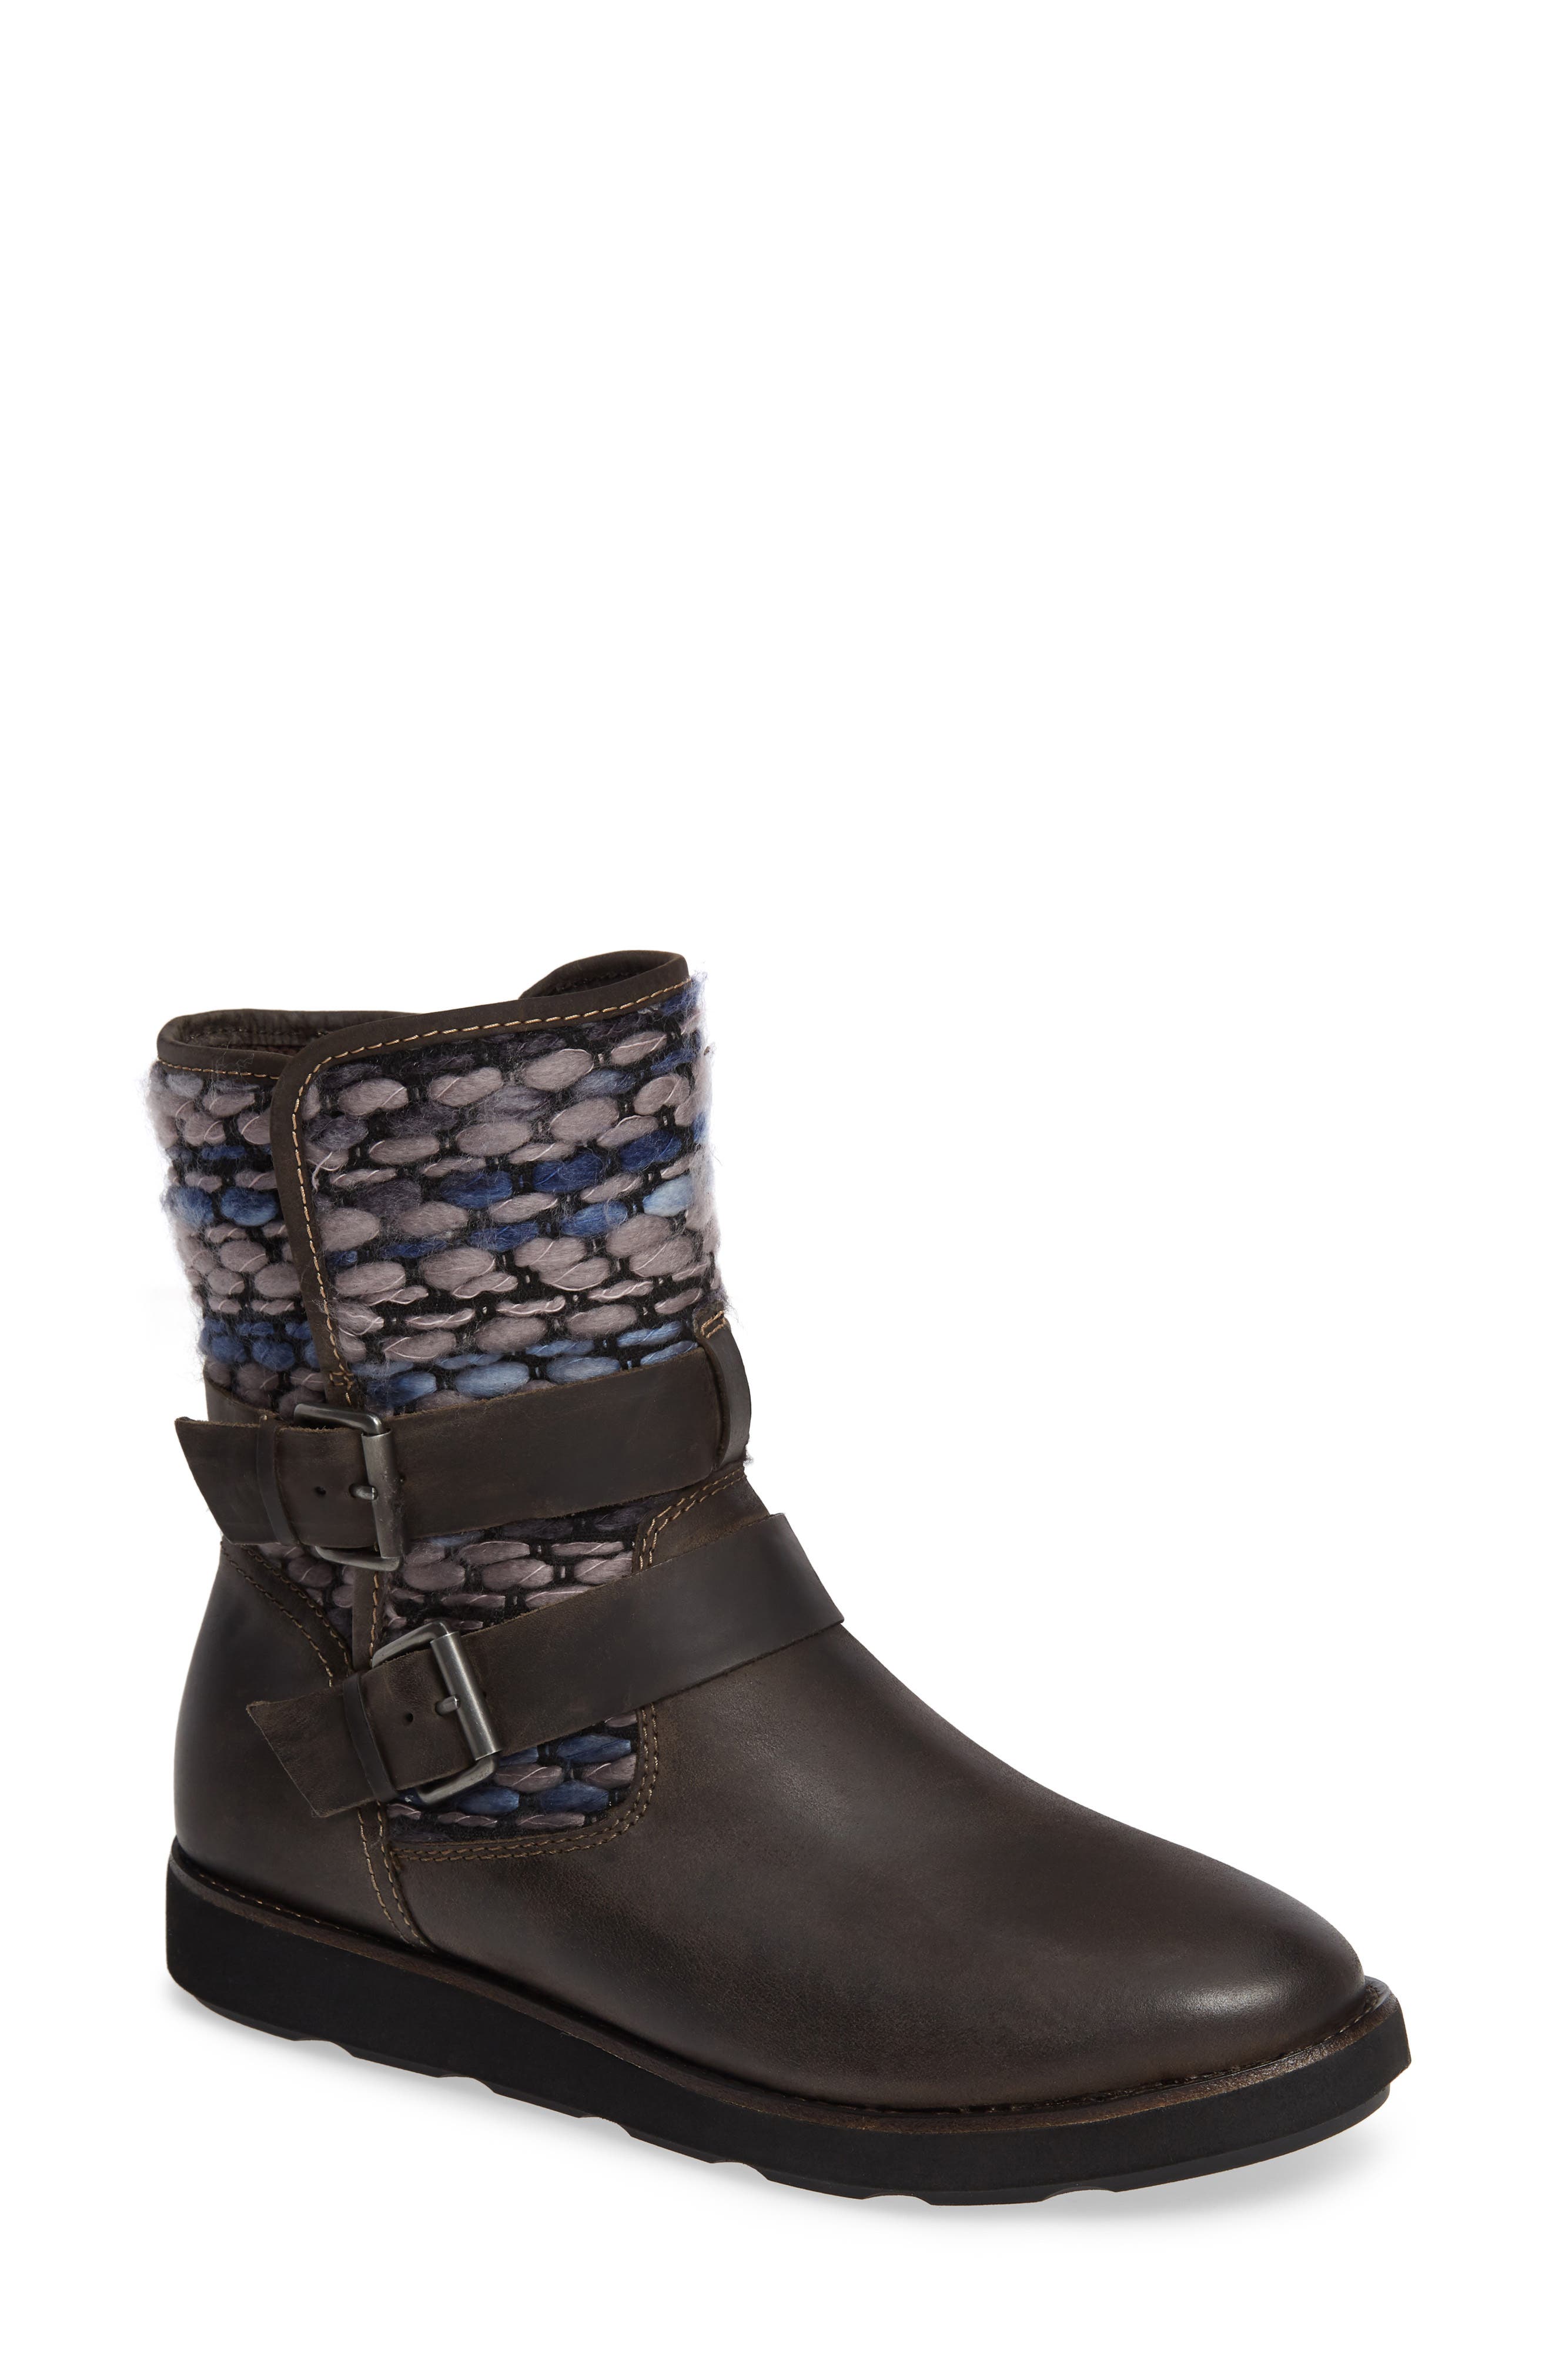 bionica nordic knit boot